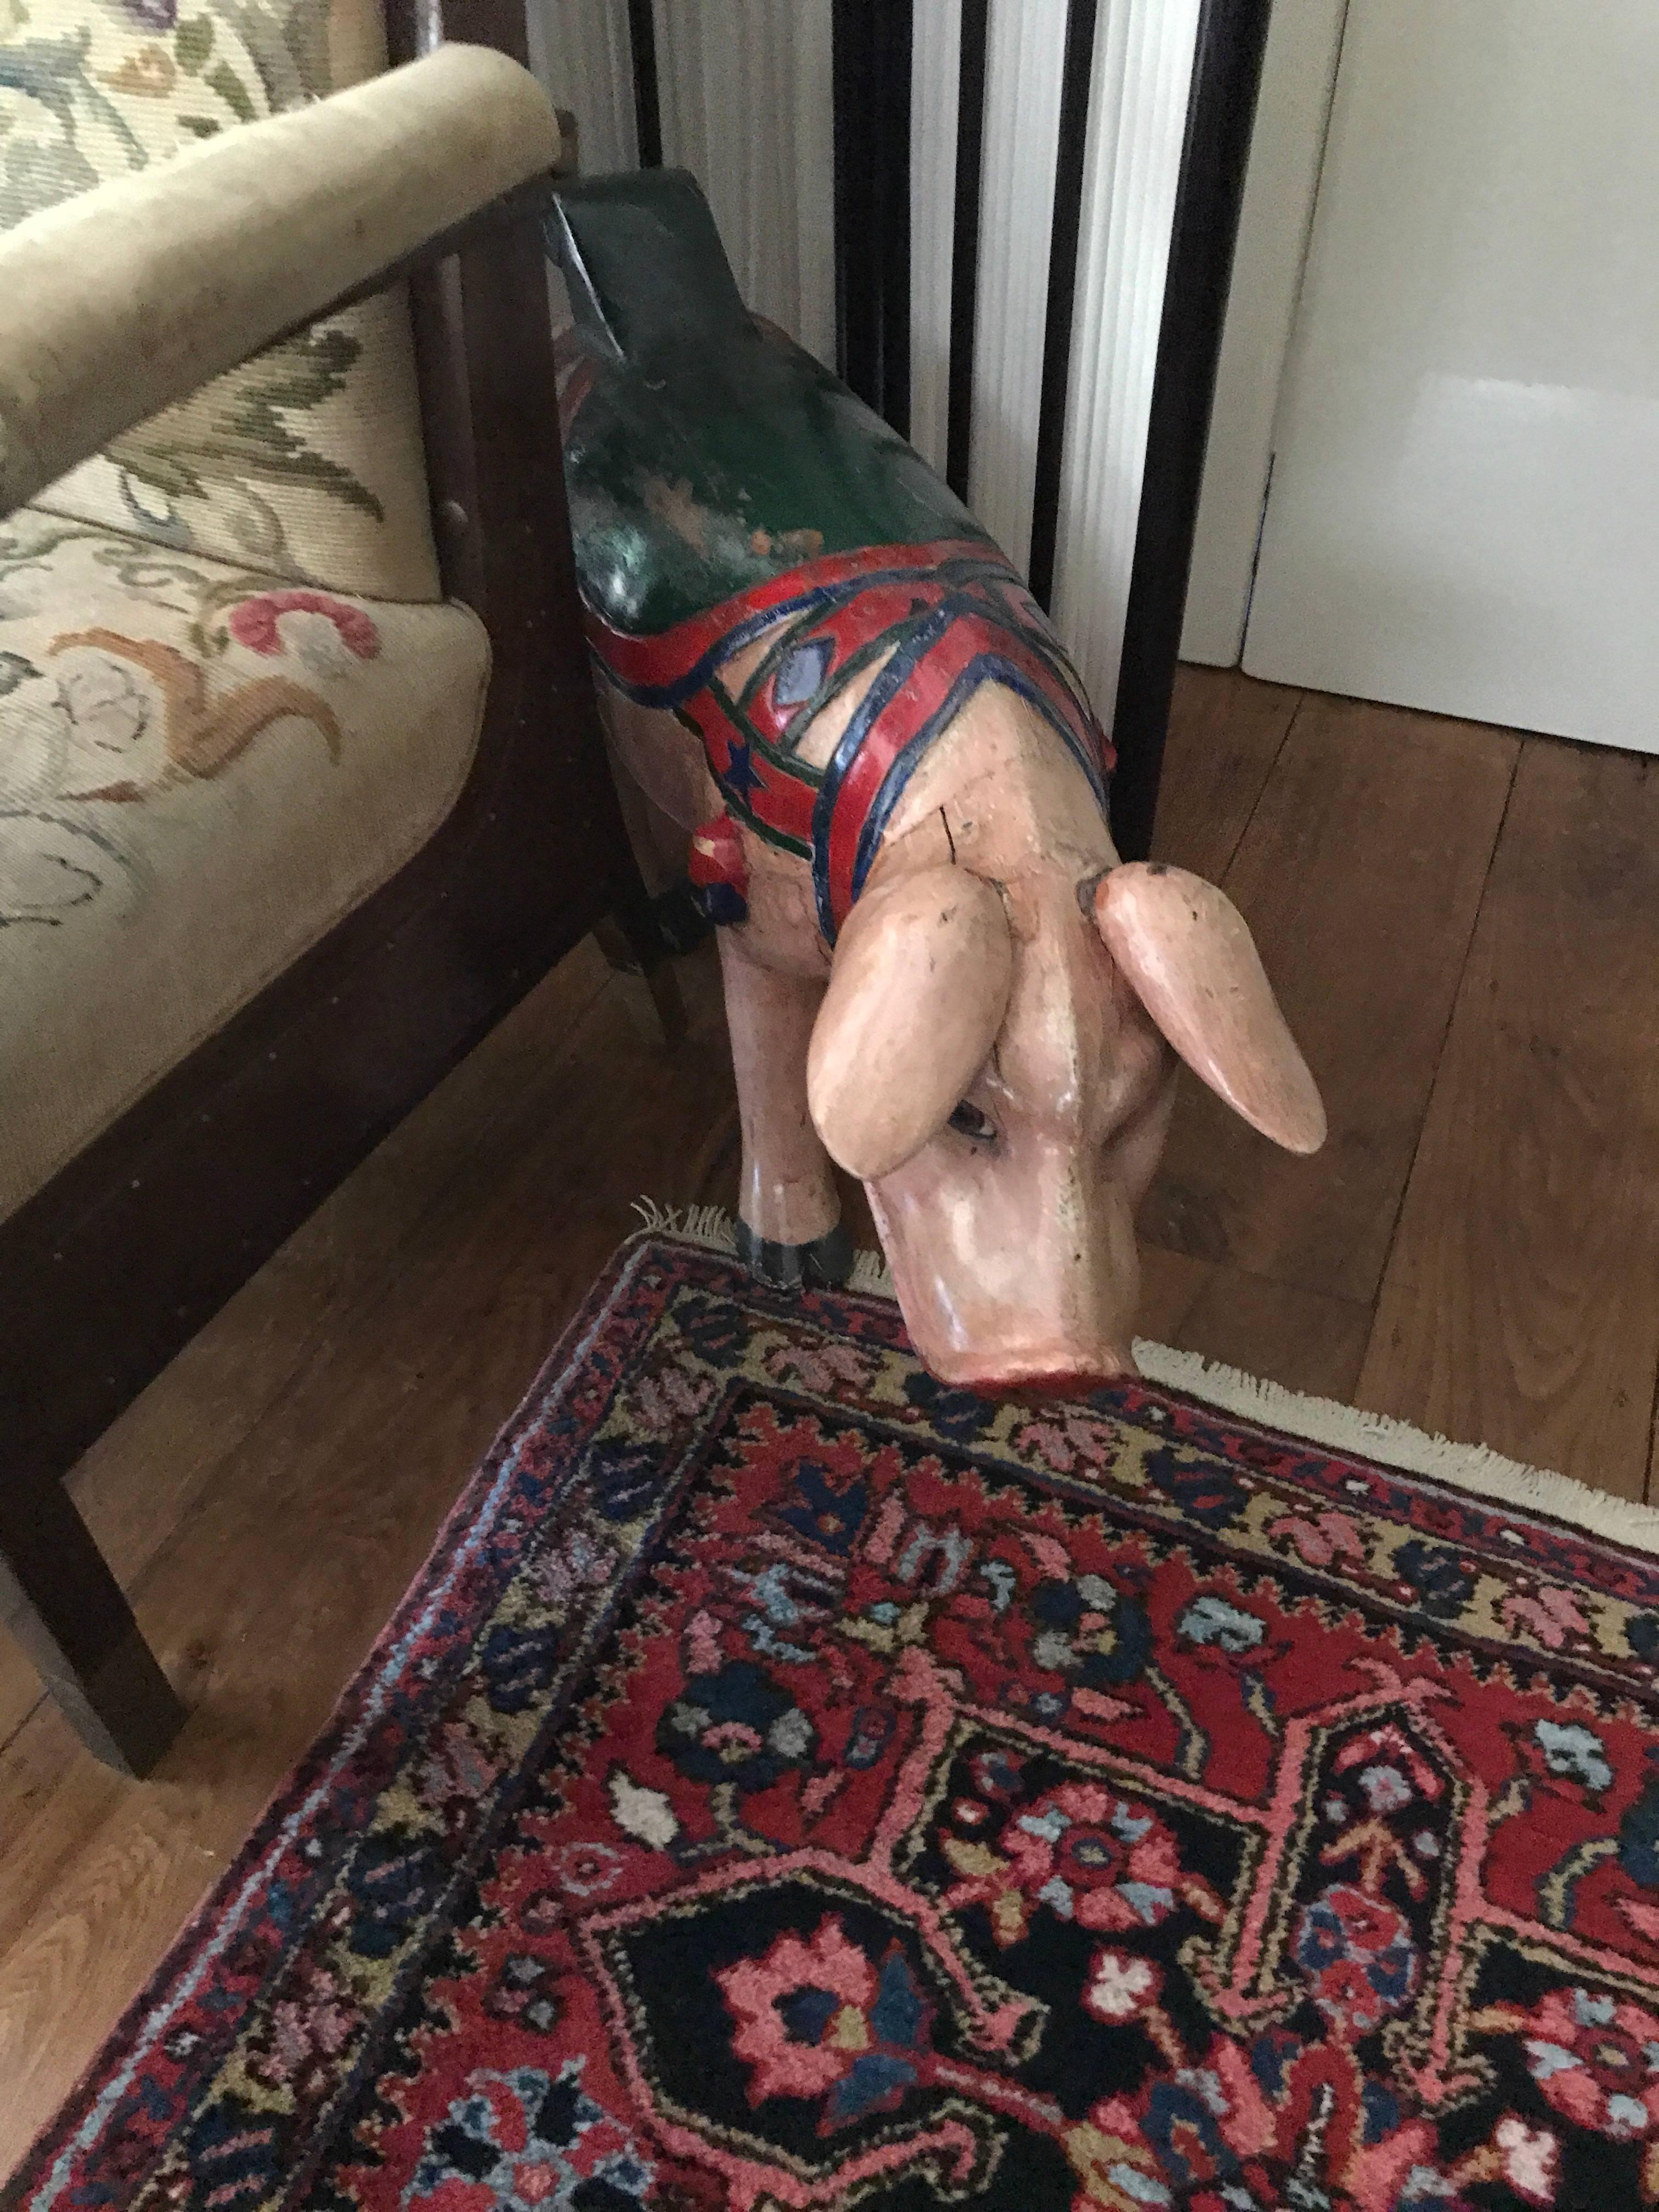 Painted Fairmill Pig Second of a Pair “1900” Extremely Rare one of two